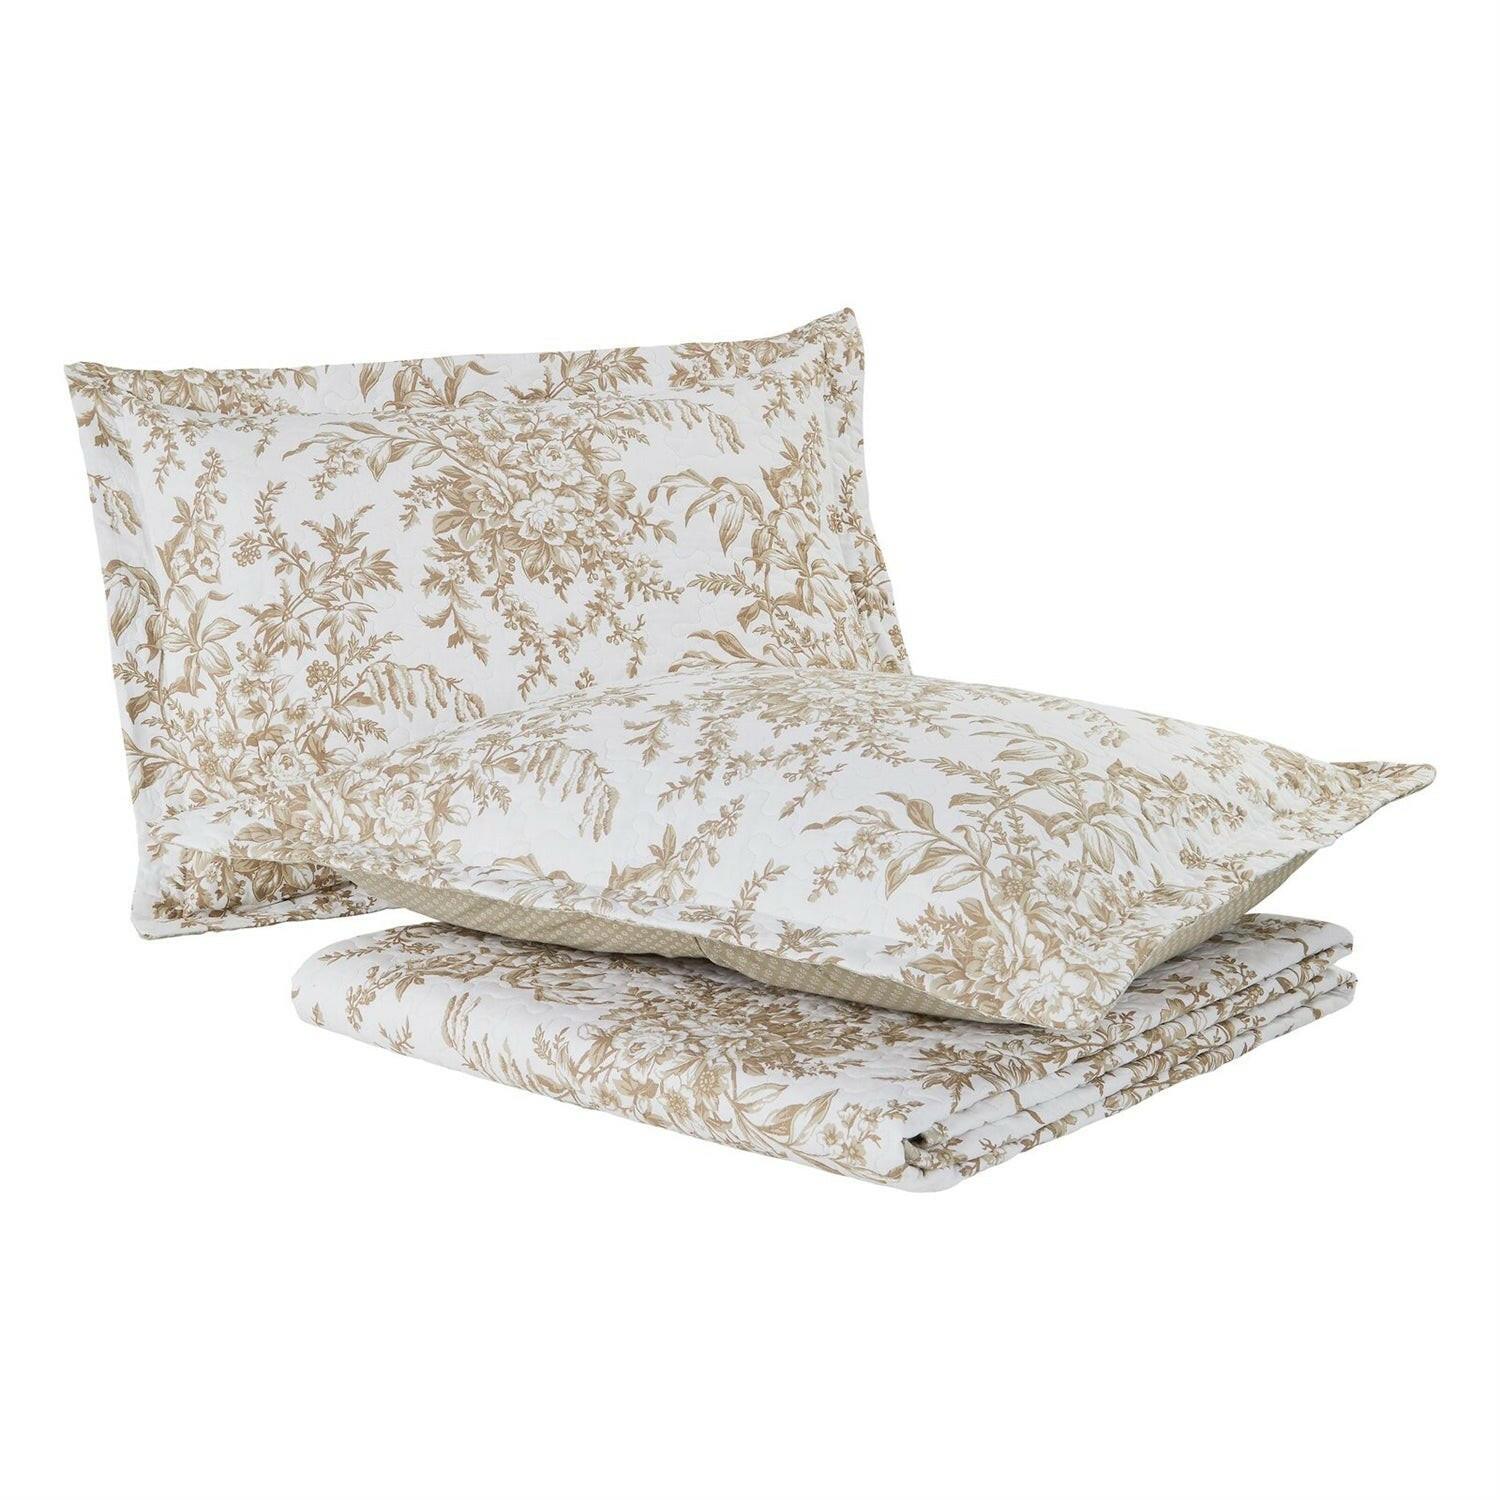 Full/Queen 3 Piece Bed-in-a-Bag Bohemian Tan Beige Floral Cotton Quilt Set - FurniFindUSA